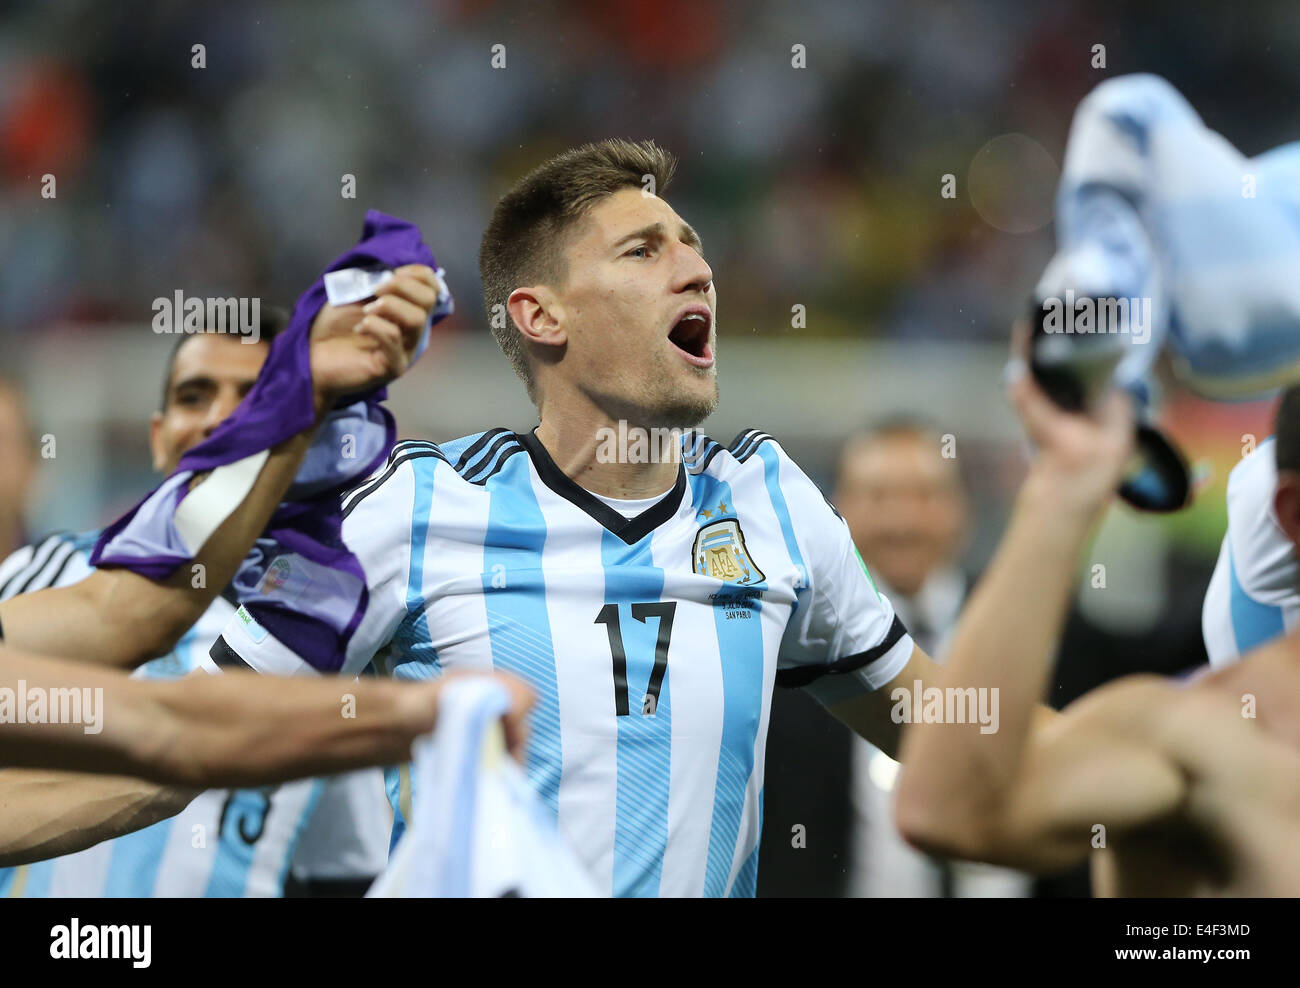 Sao Paulo, Brazil. 9th July, 2014. Argentina's Federico Fernandez celebrates the victory after a semifinal match between Netherlands and Argentina of 2014 FIFA World Cup at the Arena de Sao Paulo Stadium in Sao Paulo, Brazil, on July 9, 2014. Argentina won 4-2 on penalties over Netherlands after a 0-0 tie and qualified for the final on Wednesday. Credit:  Xu Zijian/Xinhua/Alamy Live News Stock Photo